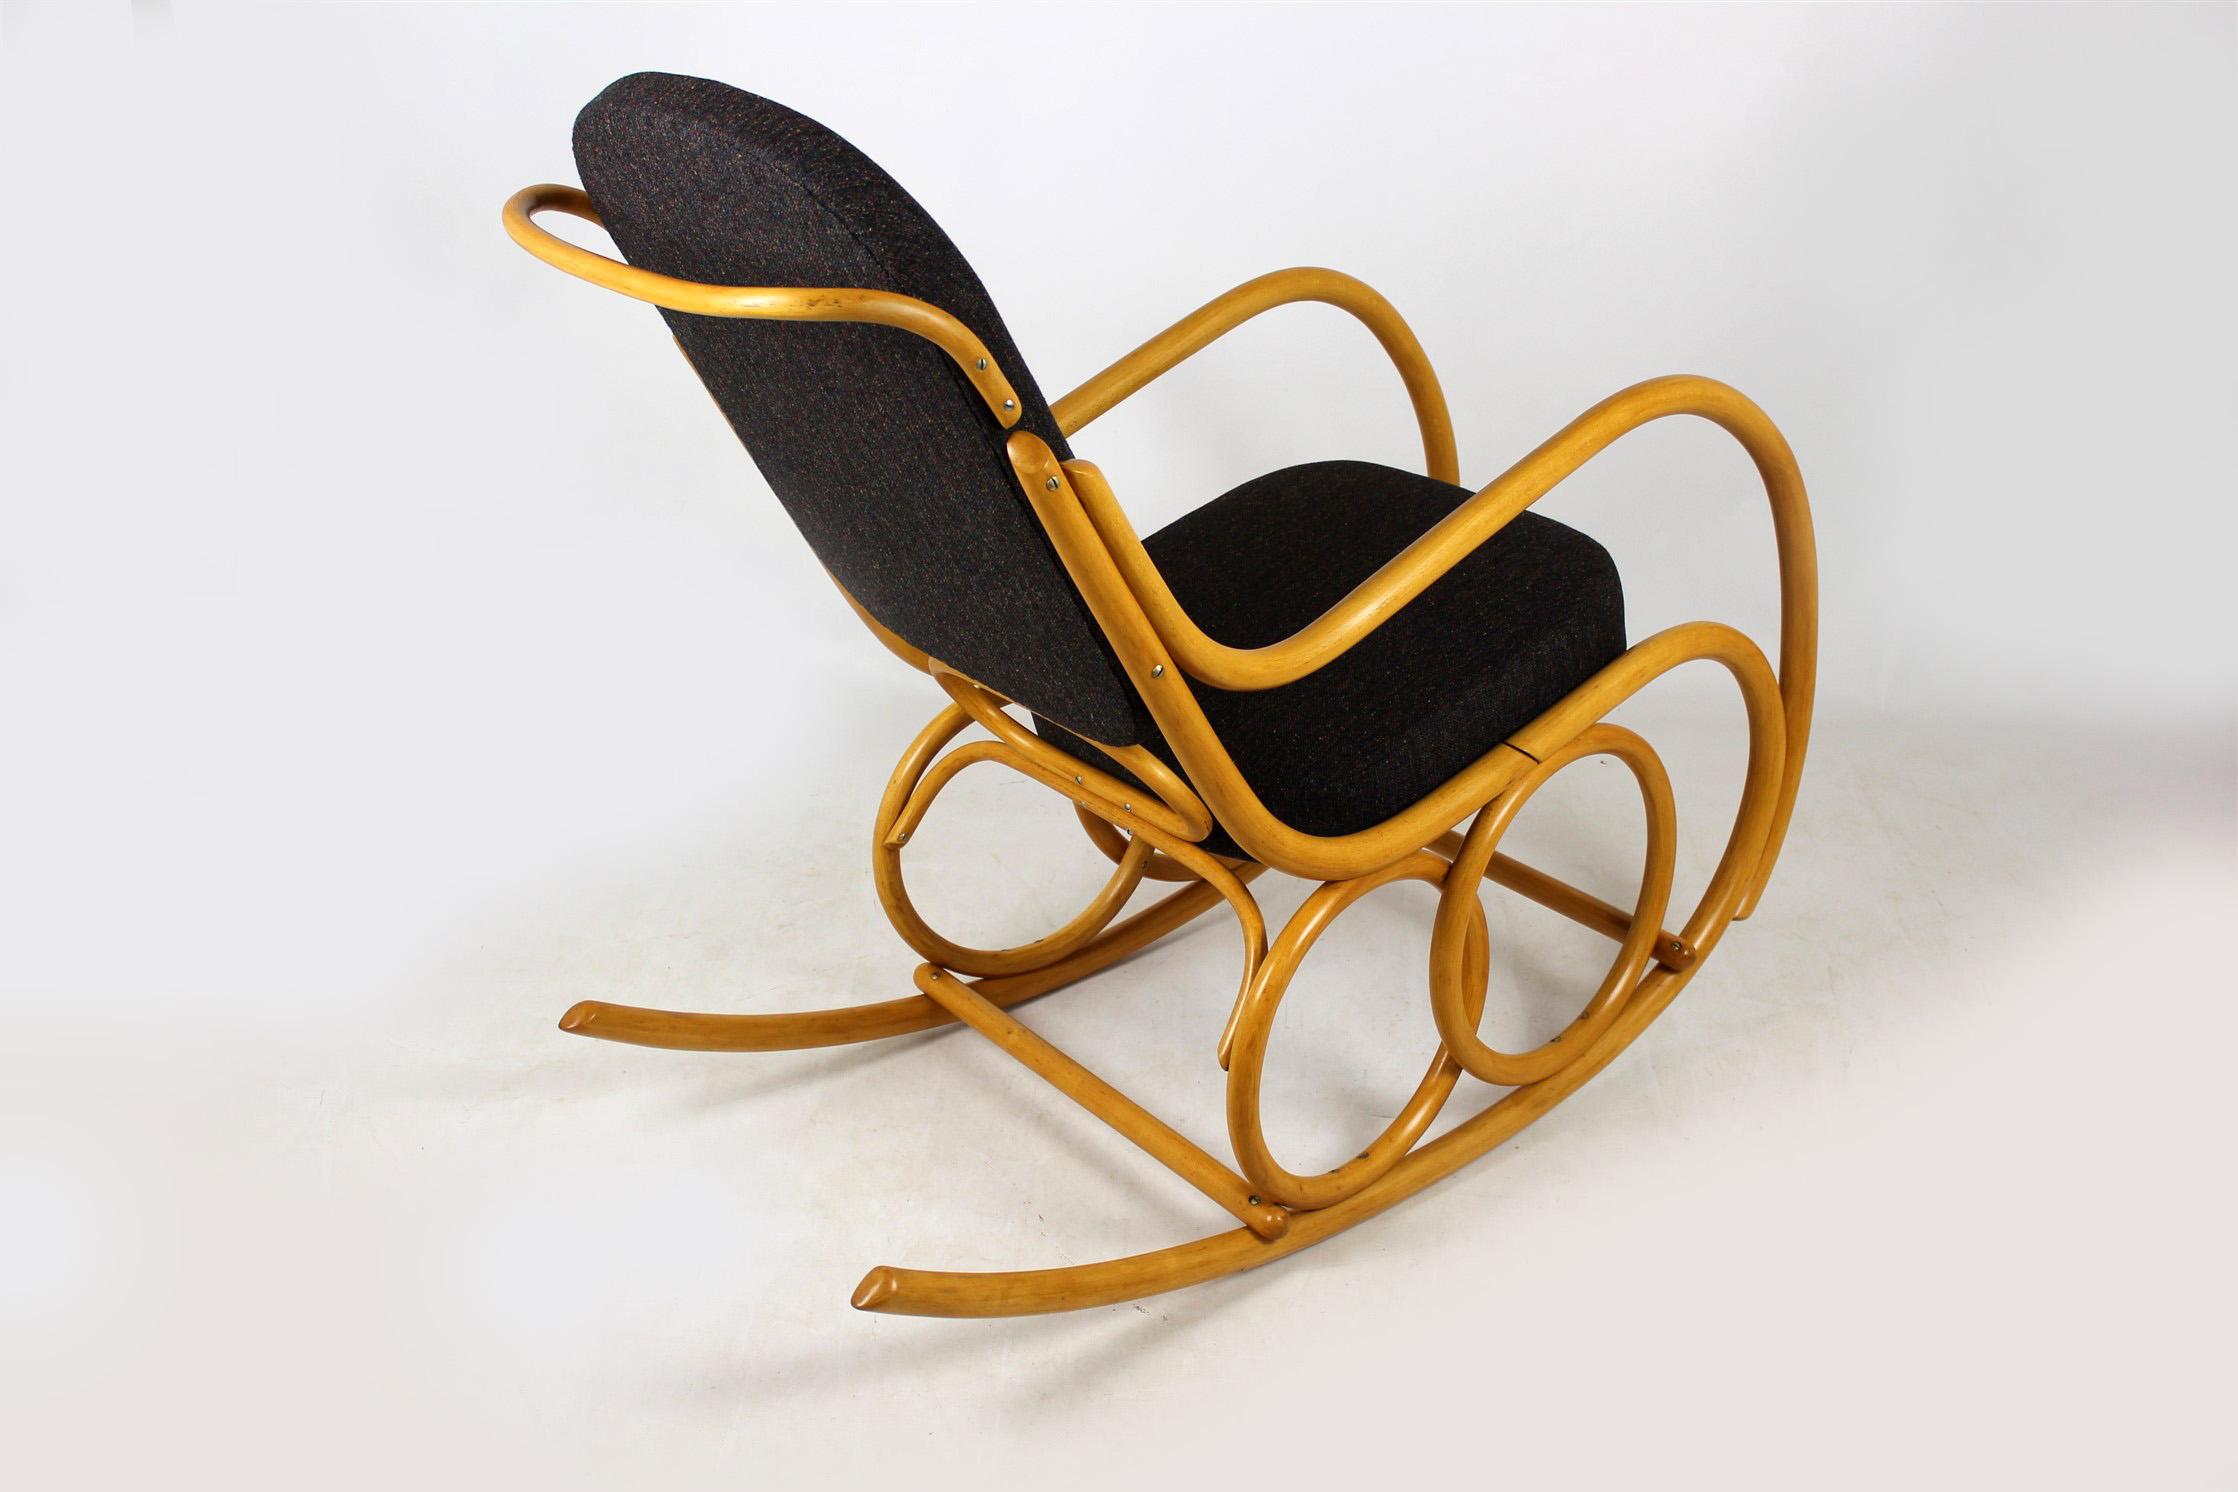 Czech Midcentury Beech Bentwood Rocking Chair from Ton, 1960s For Sale